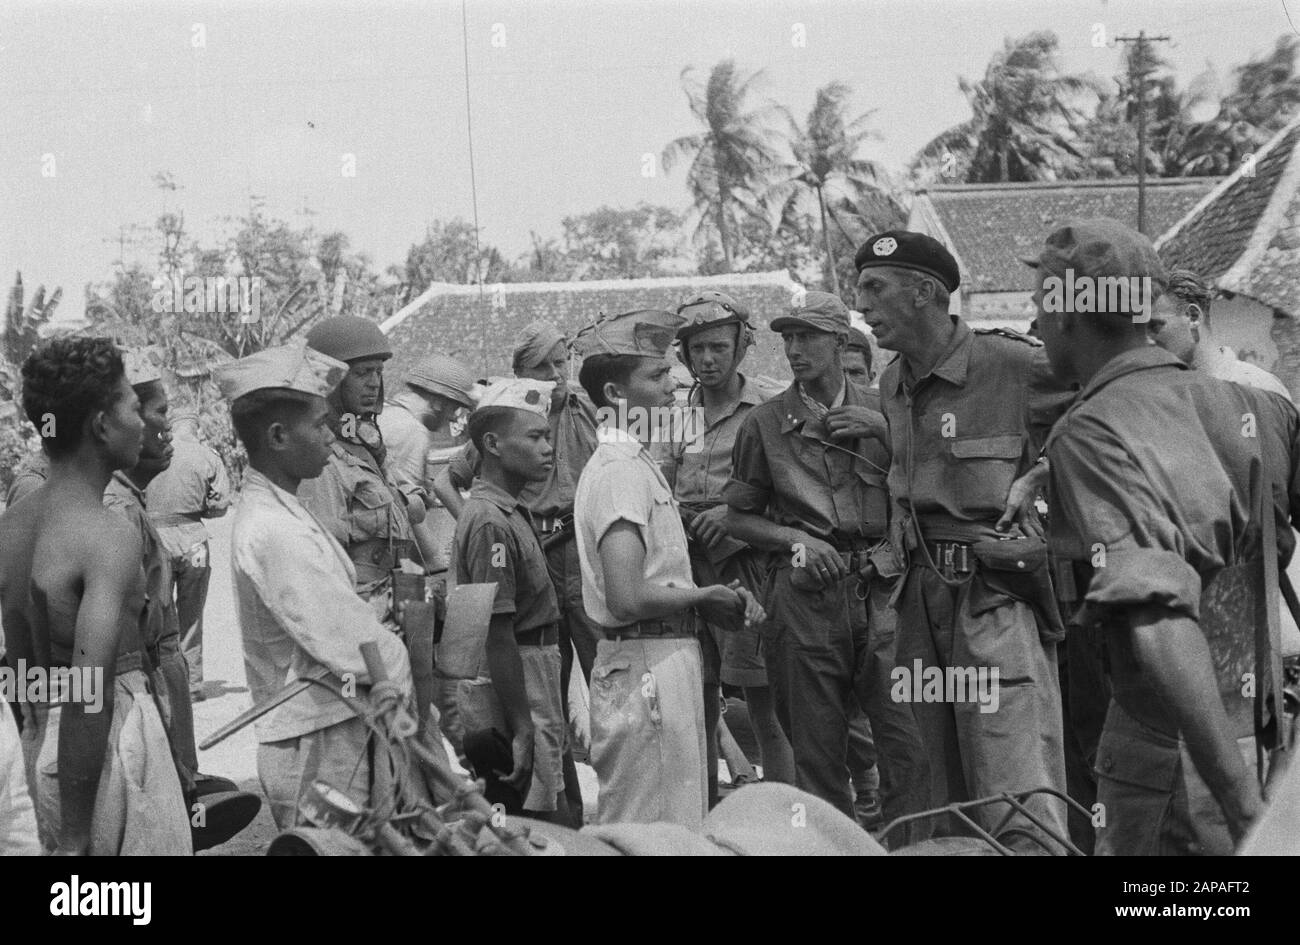 Action Cheribon Description: Cheribon 28-7-47. However, it took little effort to convince them that they did better to continue to fulfil their function Date: 28 July 1947 Location: Cheribon, Indonesia, Java, Dutch East Indies Stock Photo